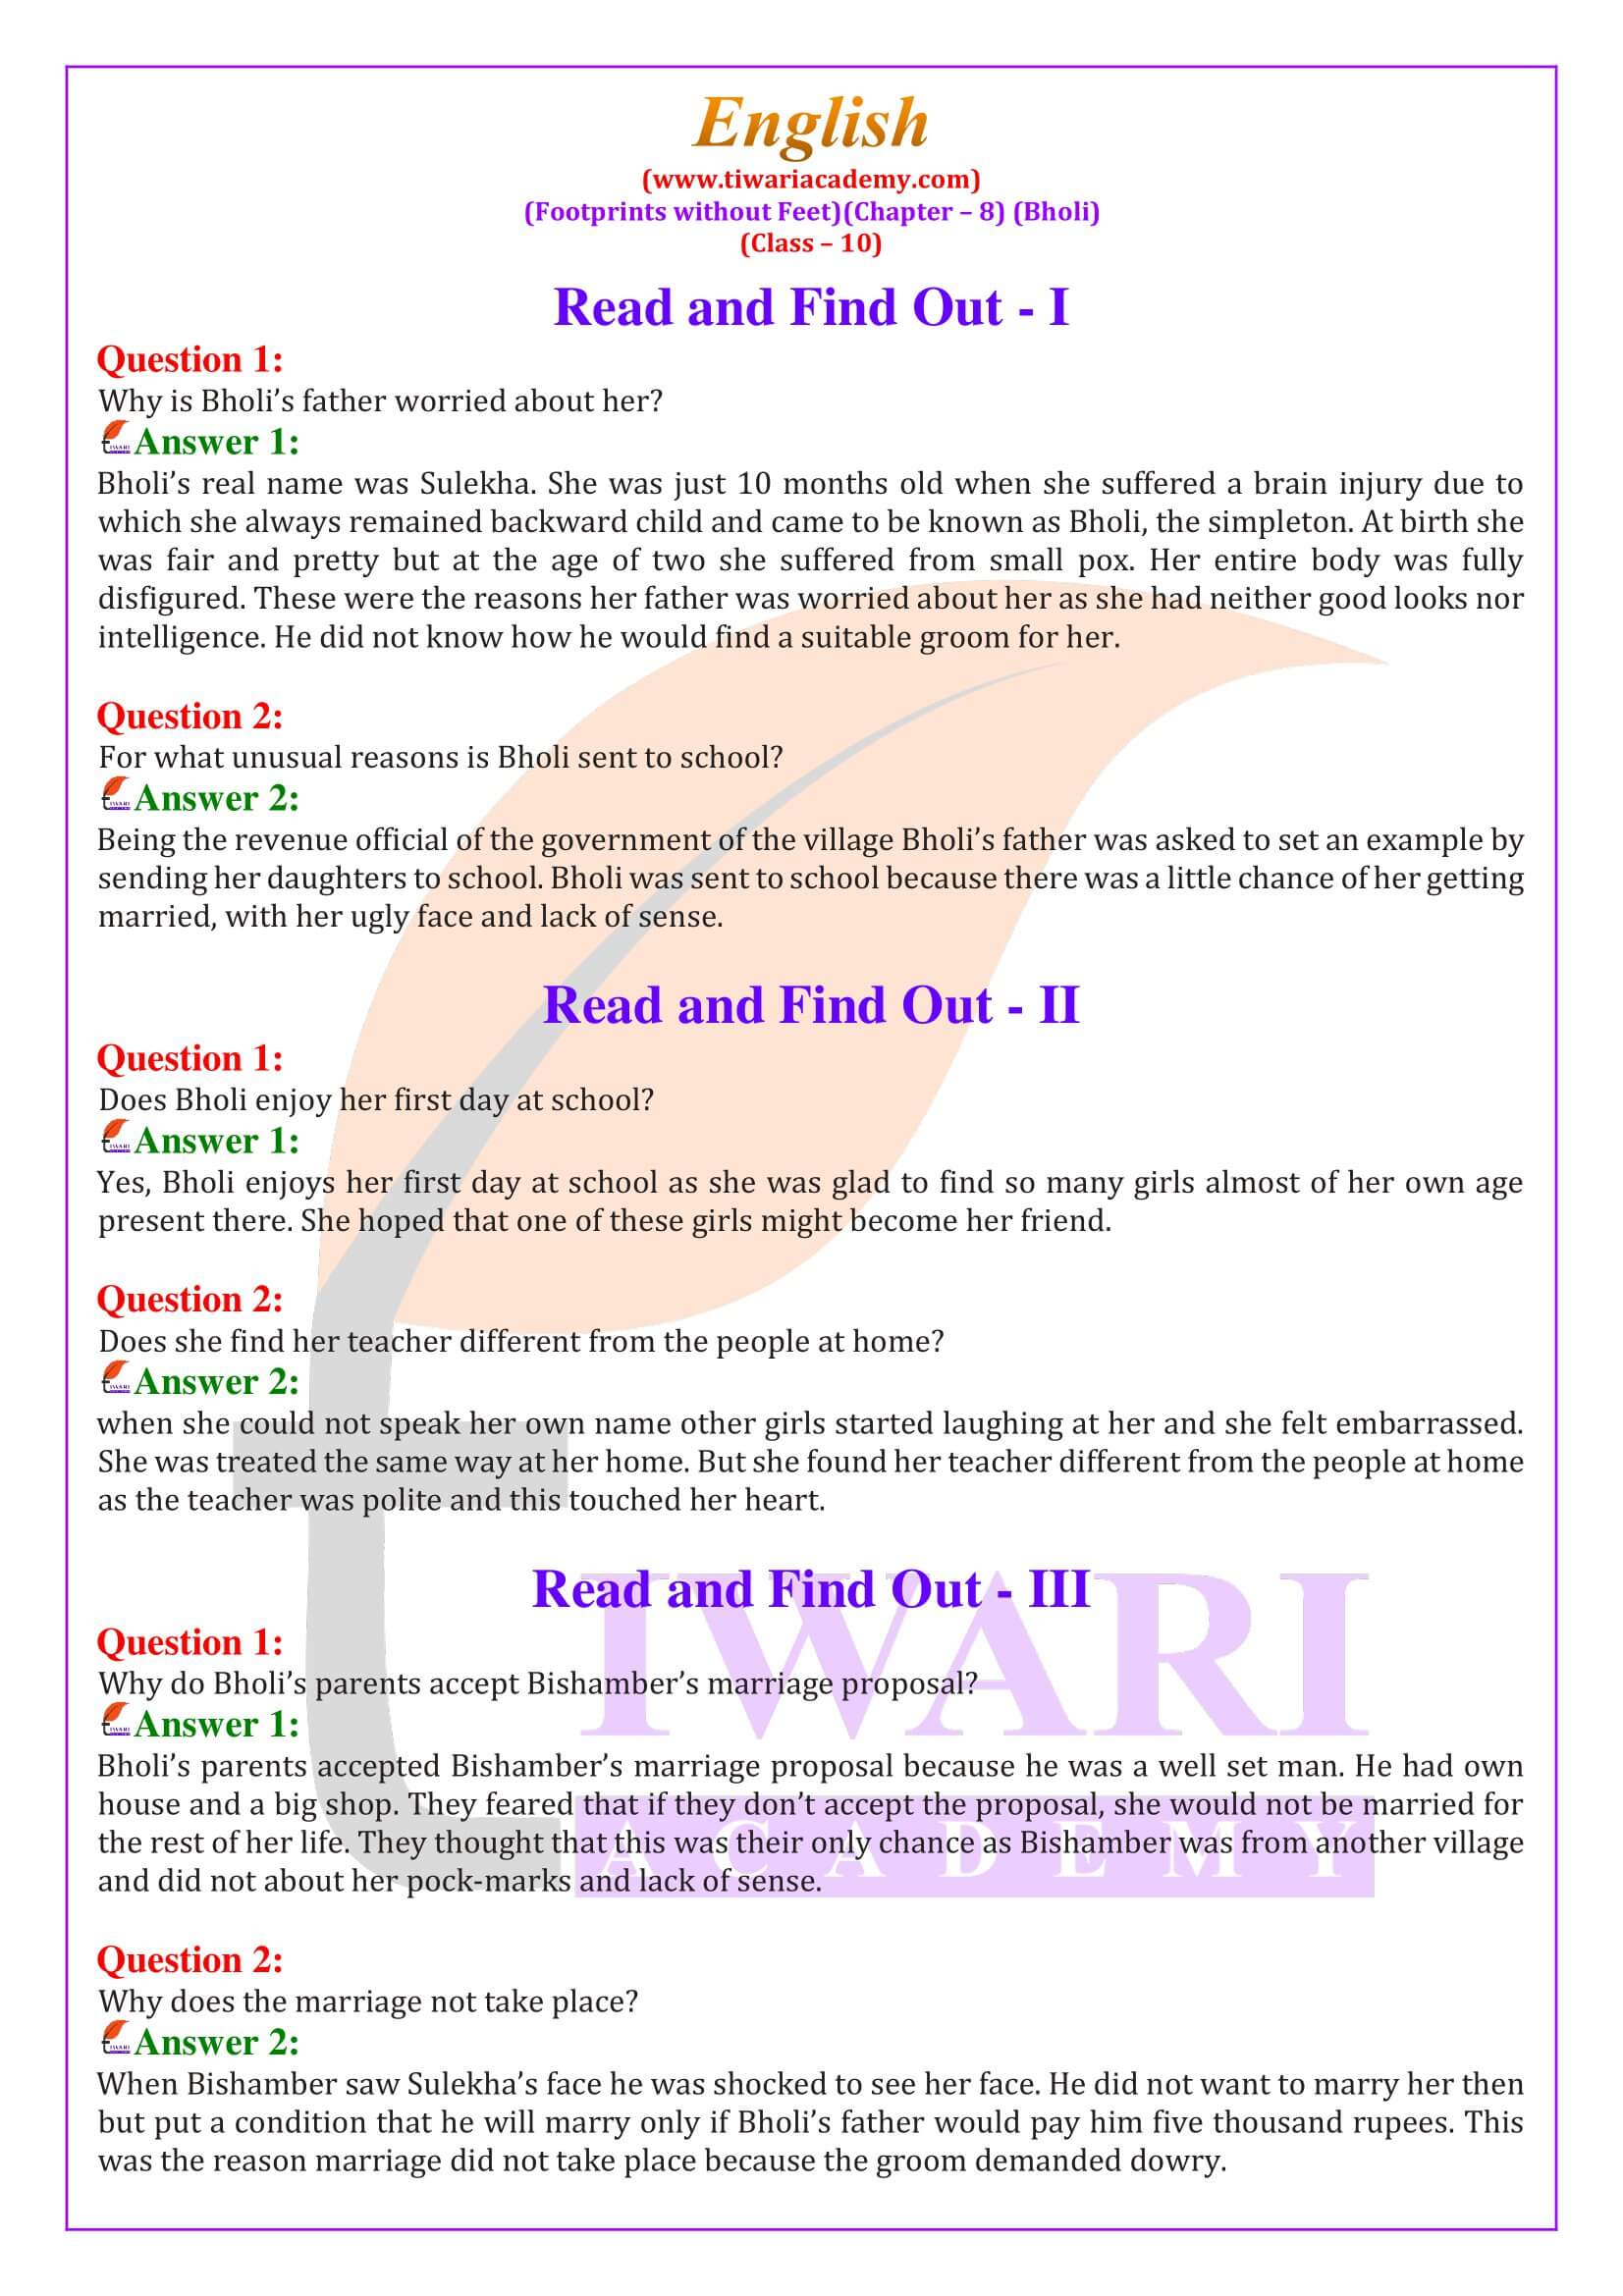 NCERT Solutions for Class 10 English Chapter 8 Bholi